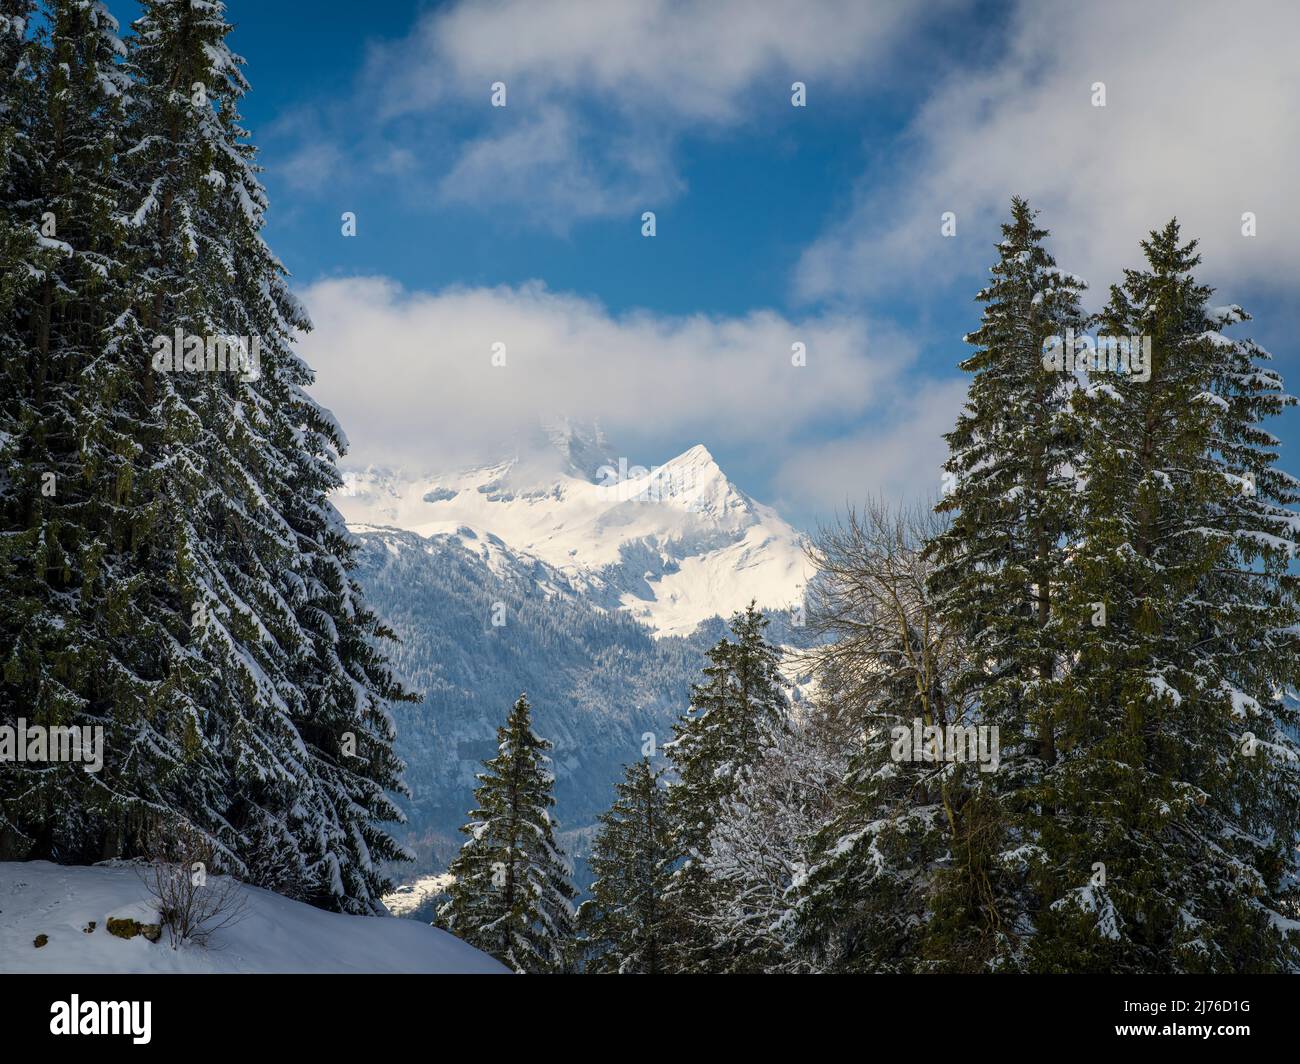 Bernese Alps in winter, mountain view with conifers in foreground Stock Photo